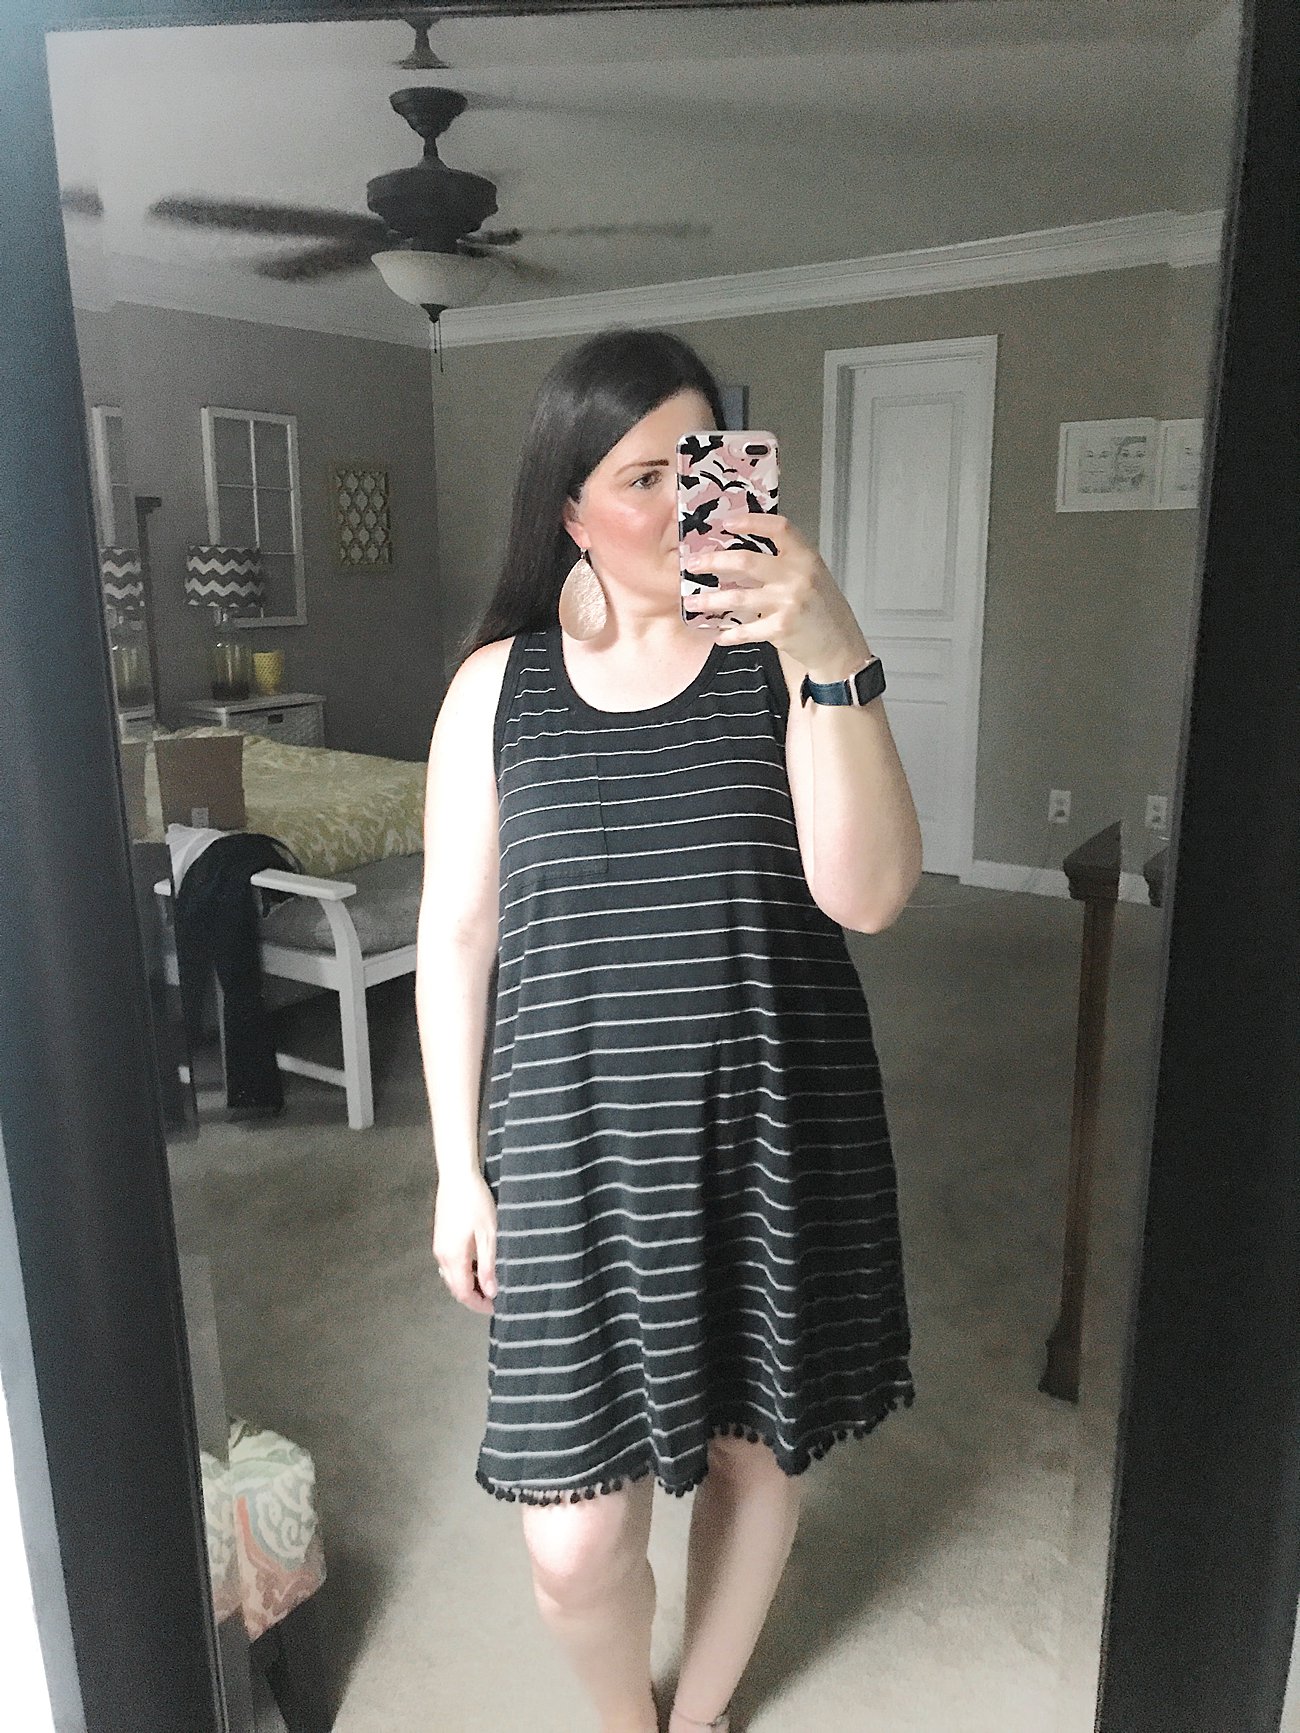 SUNDRY Jeanette Knit Dress - SIZE: XL - $108 (Made in the USA) - Stitch Fix Review #46 by popular North Carolina ethical fashion blogger Still Being Molly